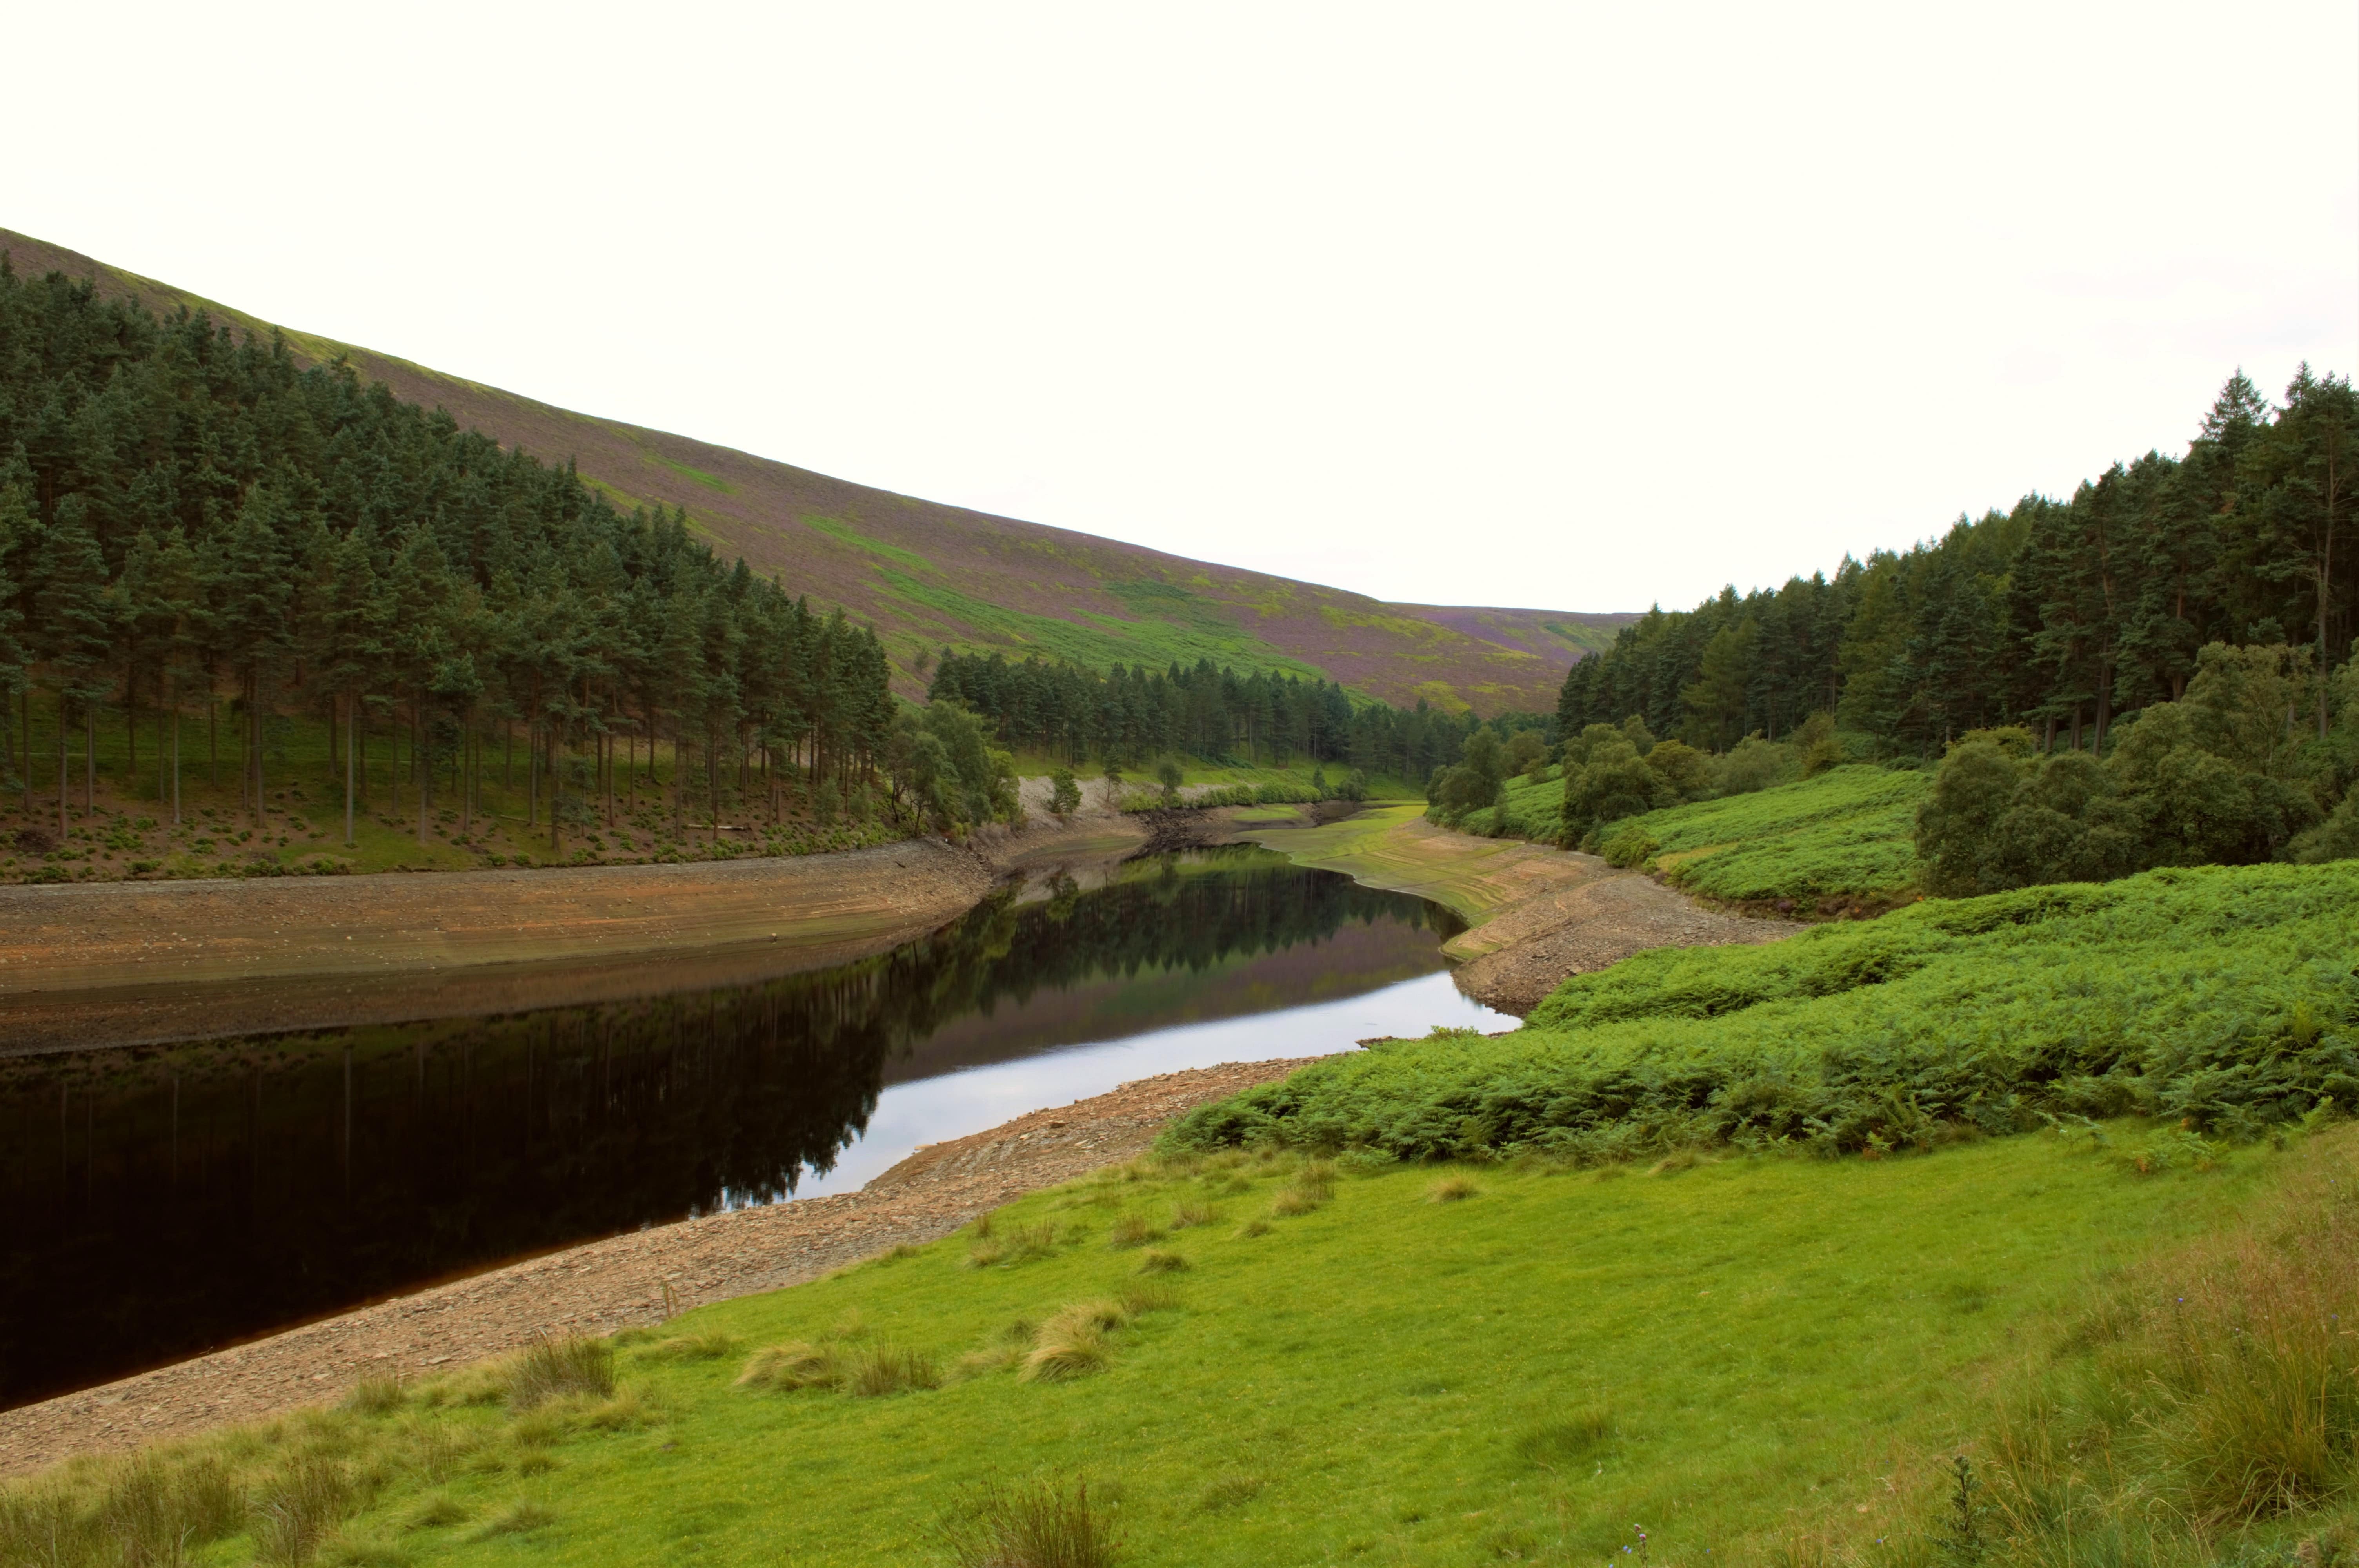 The Howden Reservoir in the Peak District